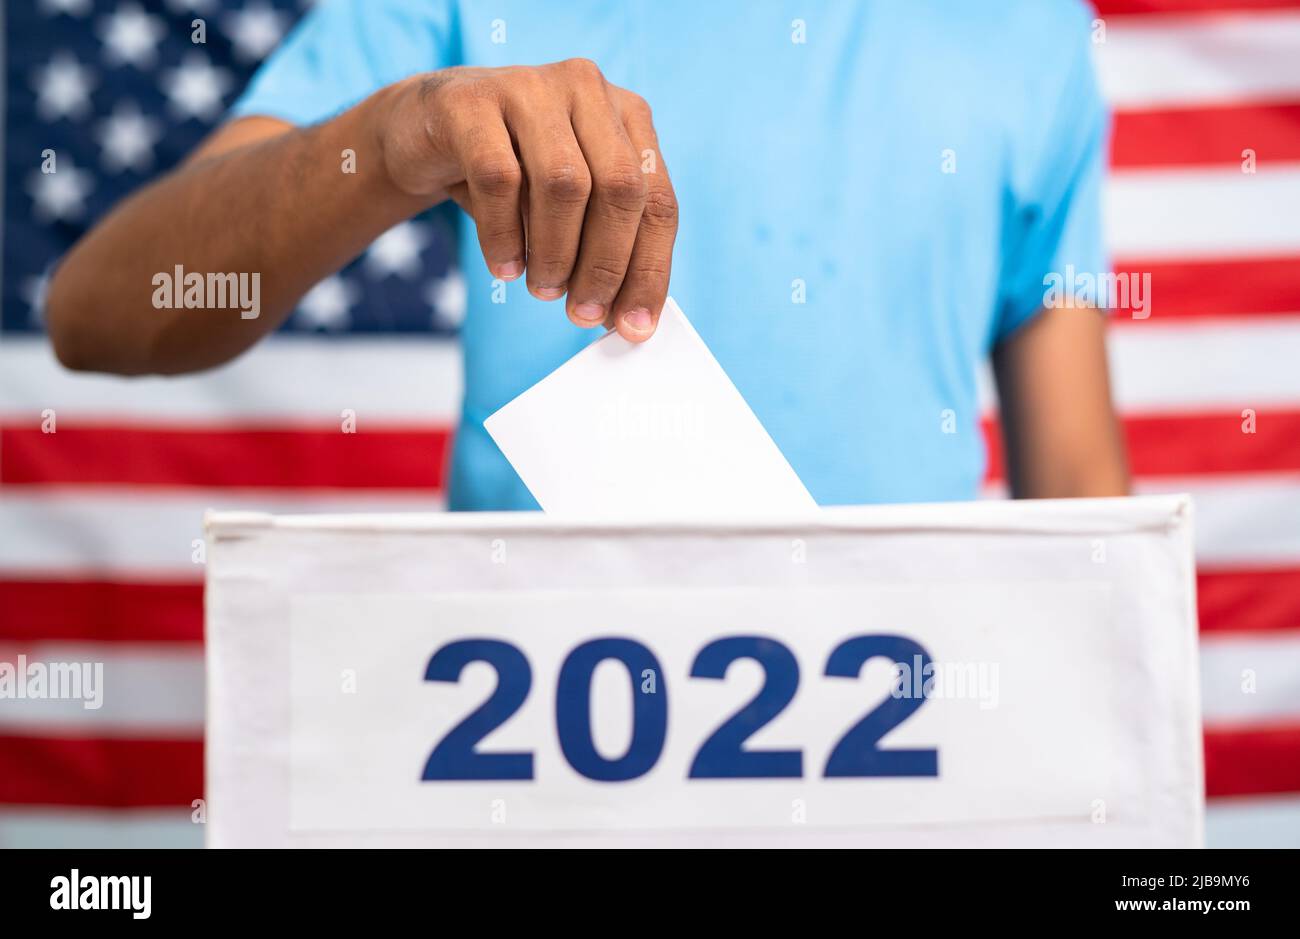 Man placing ballot paper into 2022 ballot box in front of american flag - concept of 2022 midterm US election, voting and democracy Stock Photo